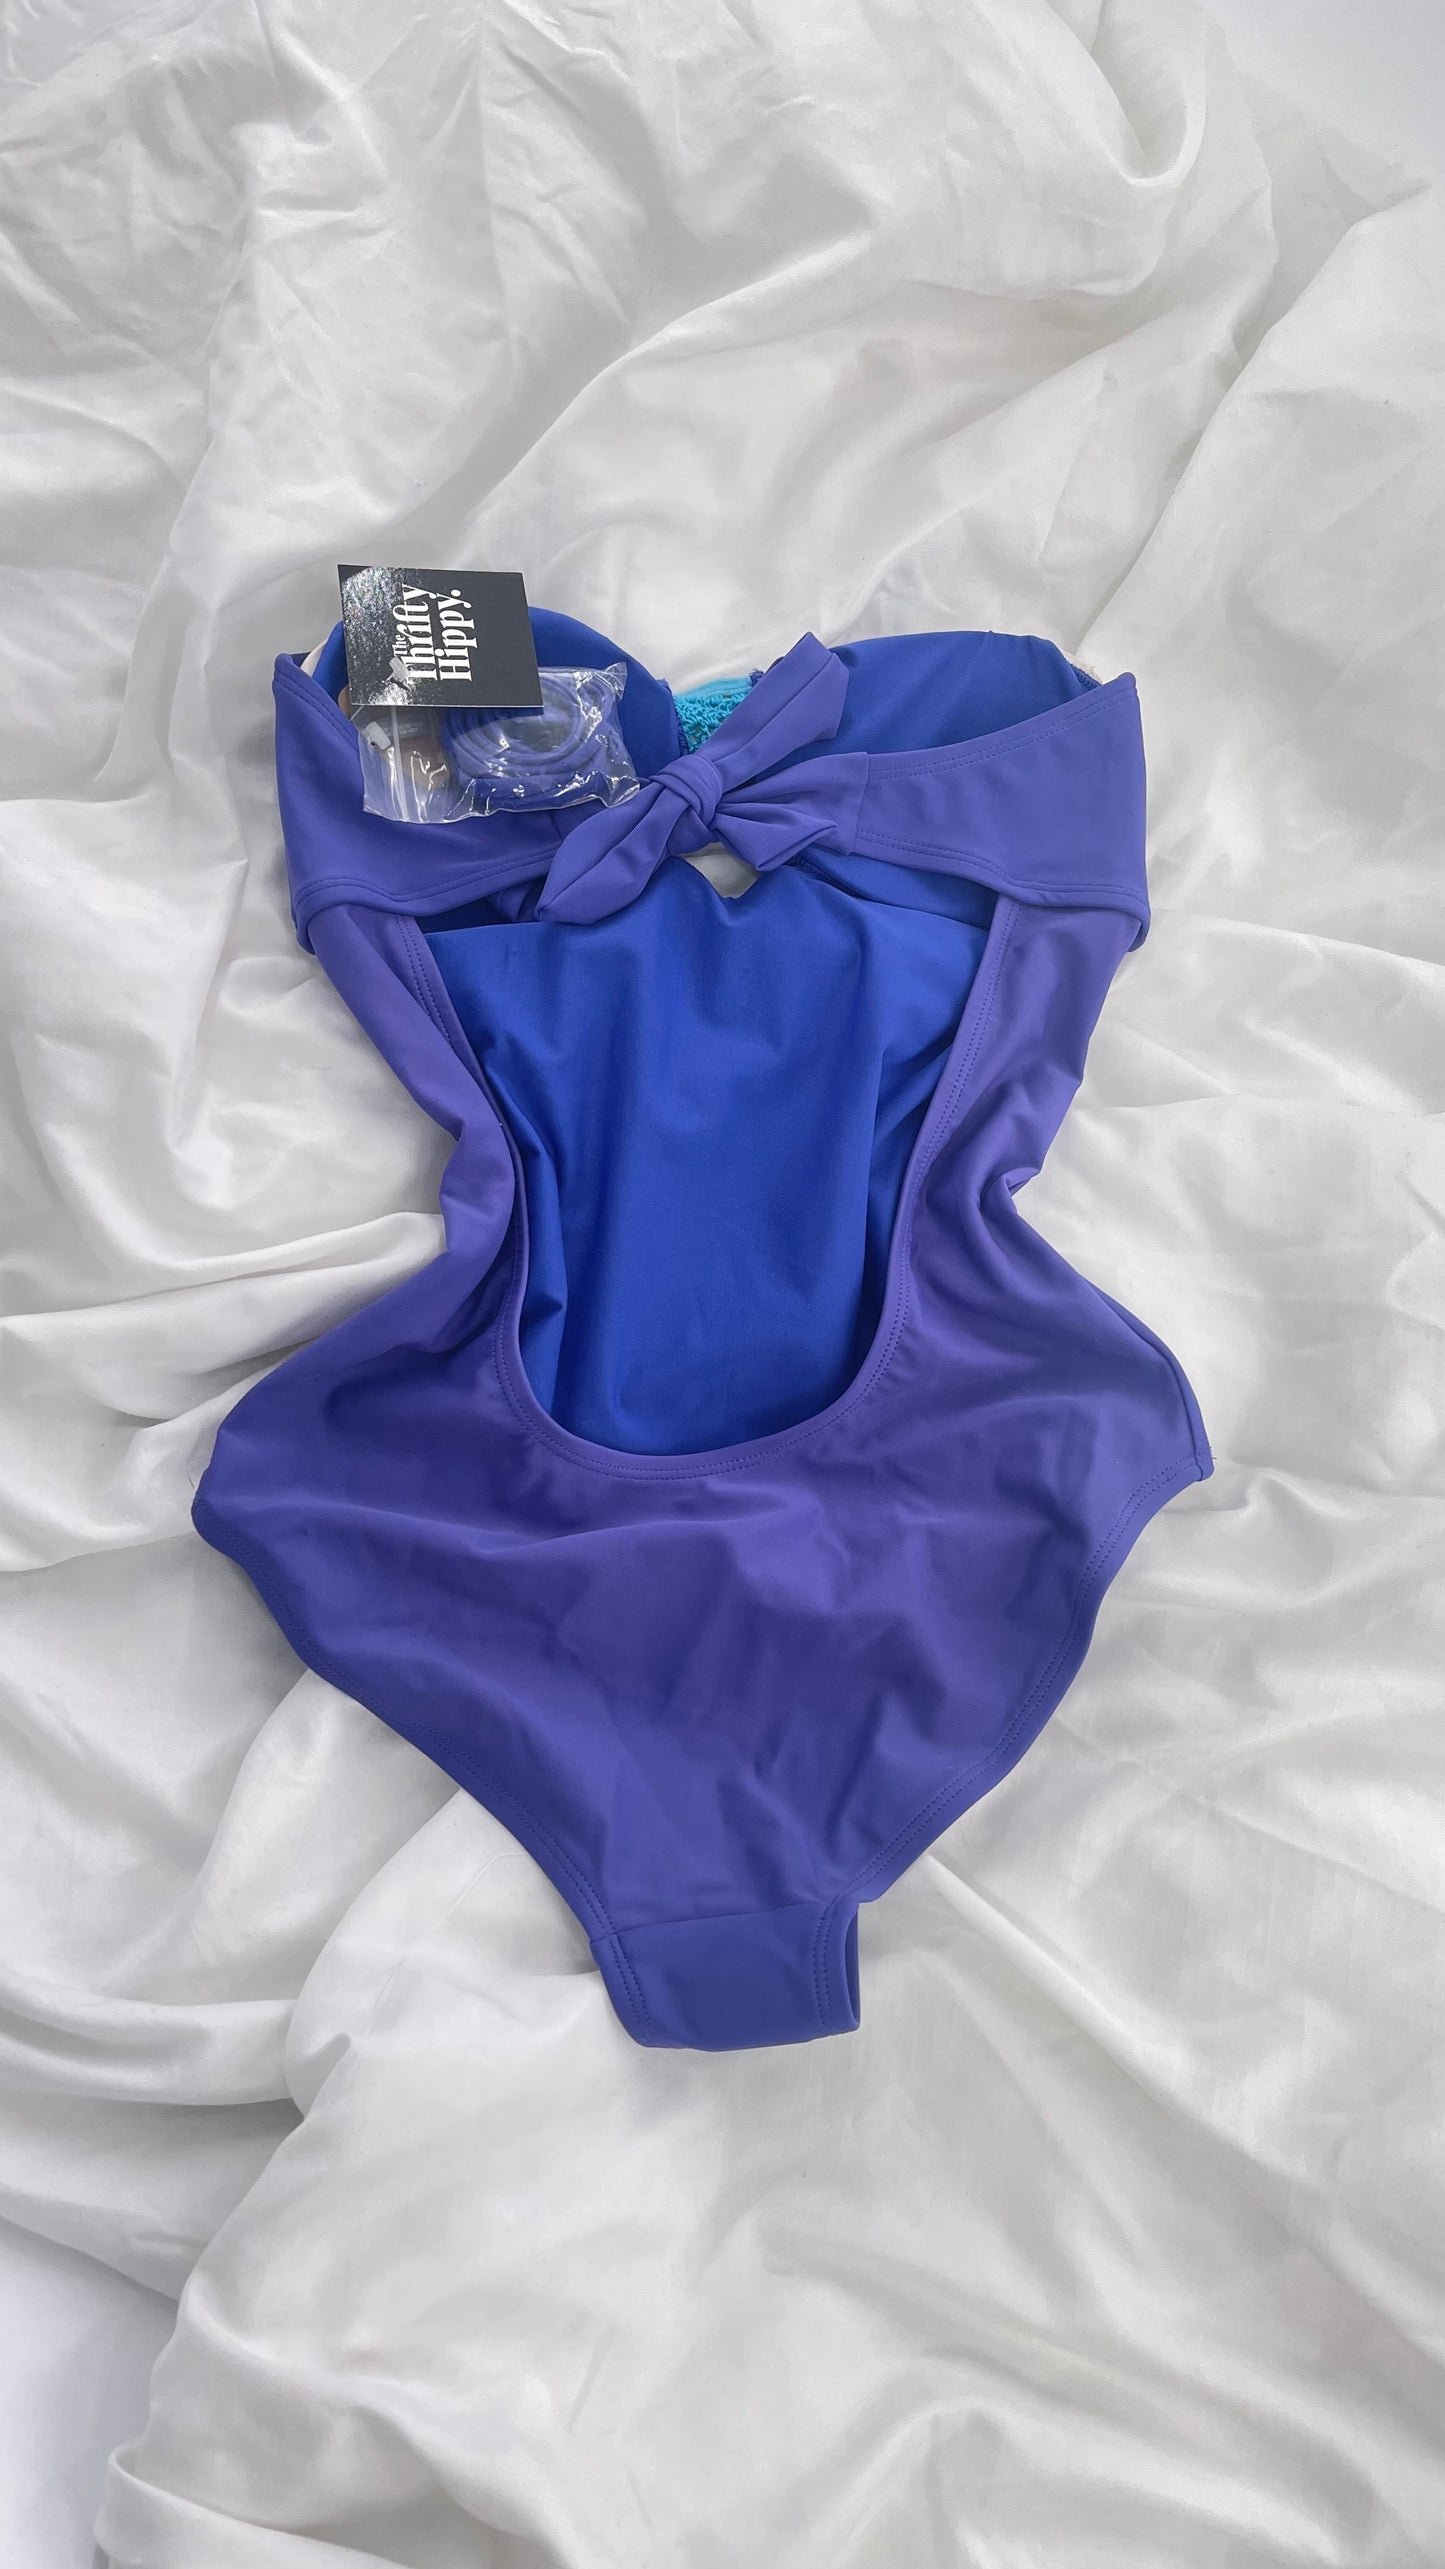 Aerie Purple/Blue One Piece Swimsuit with Crochet Bust and Open Back (Small)